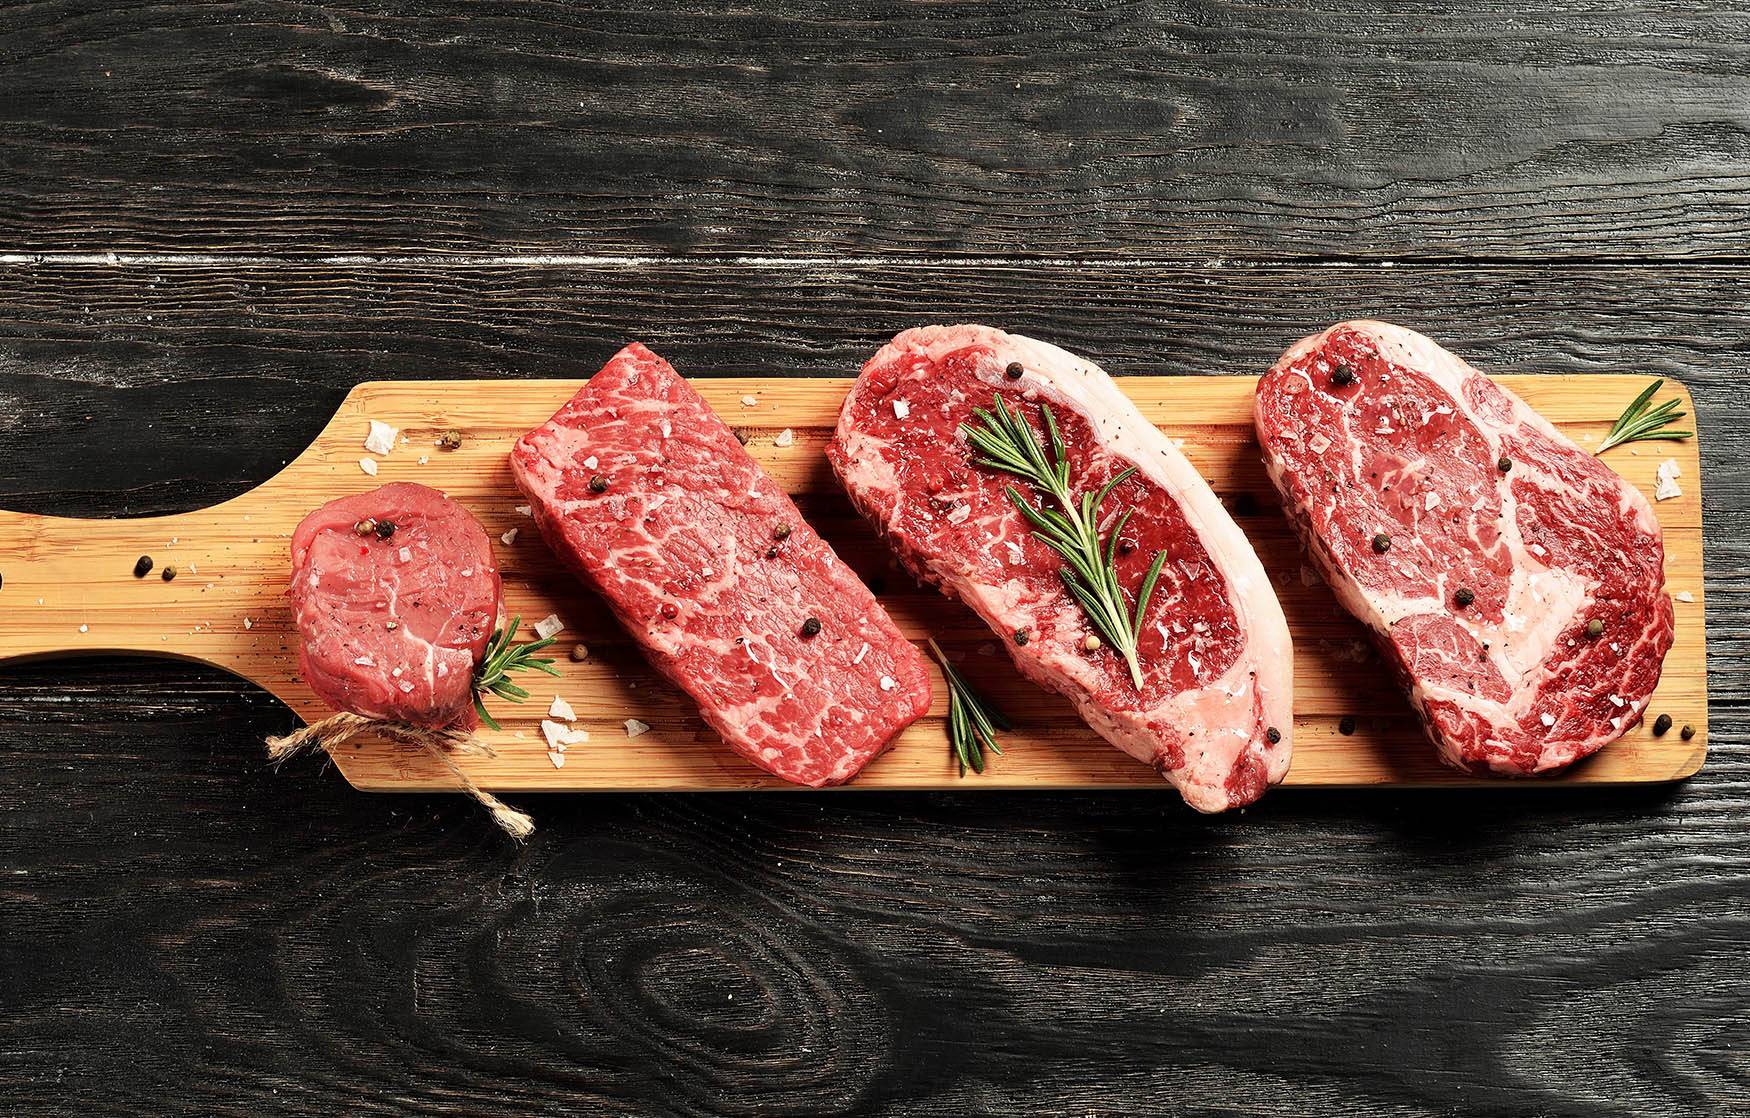 Ugh, apparently meat is even worse for us than we belief